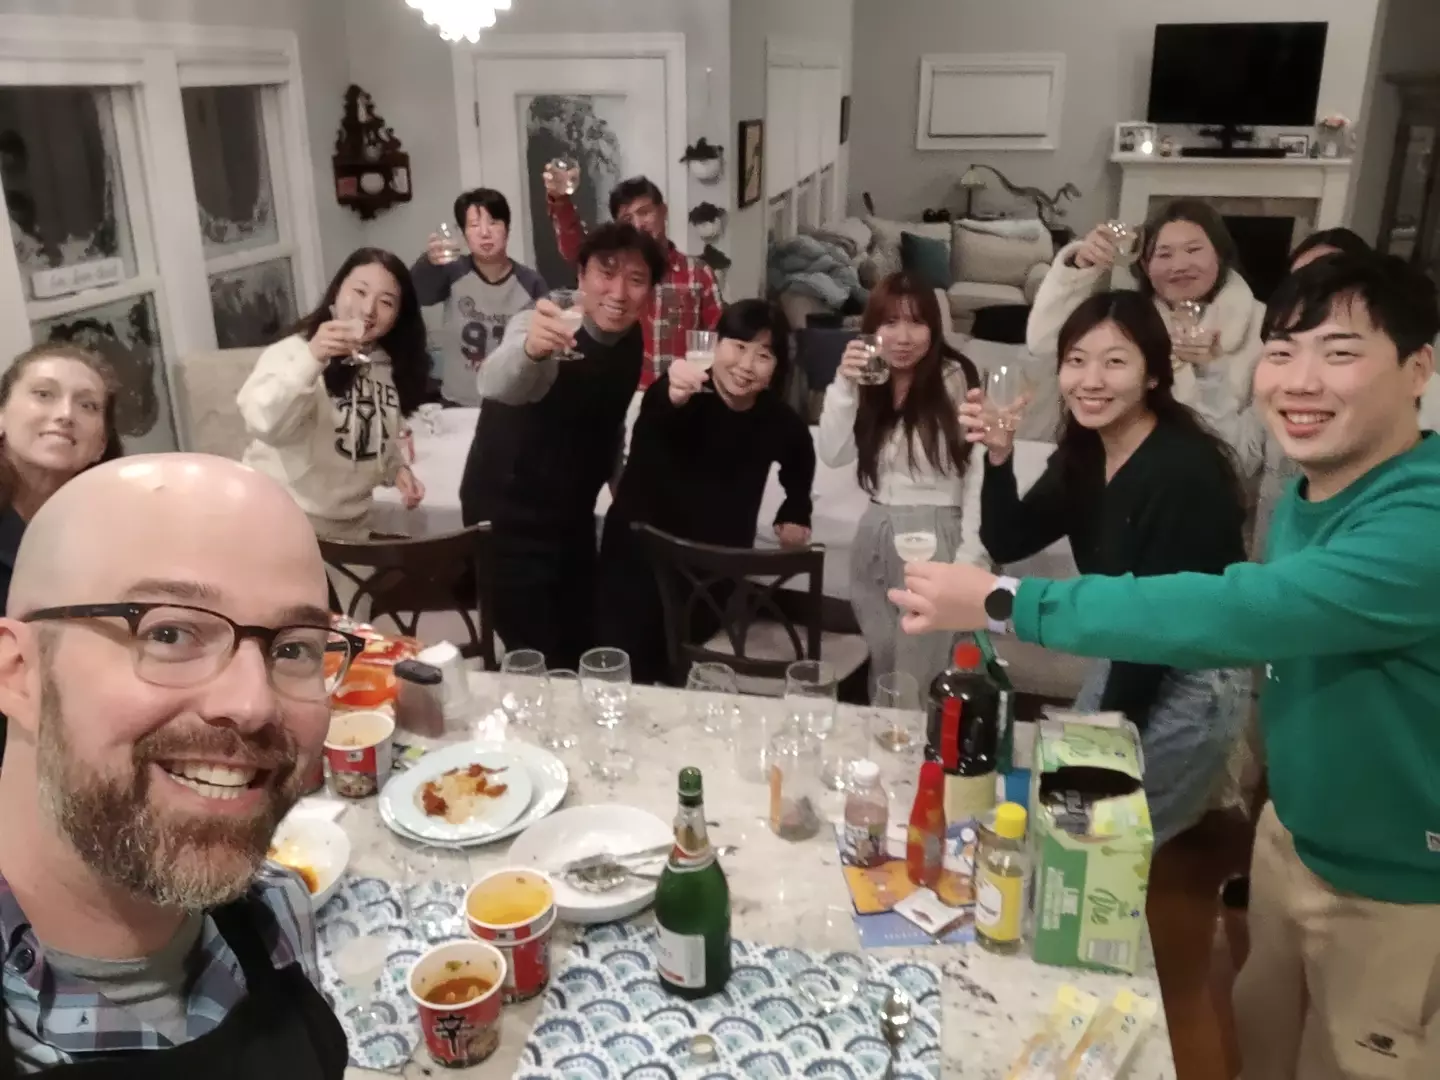 A couple opened their home to a group of tourists.